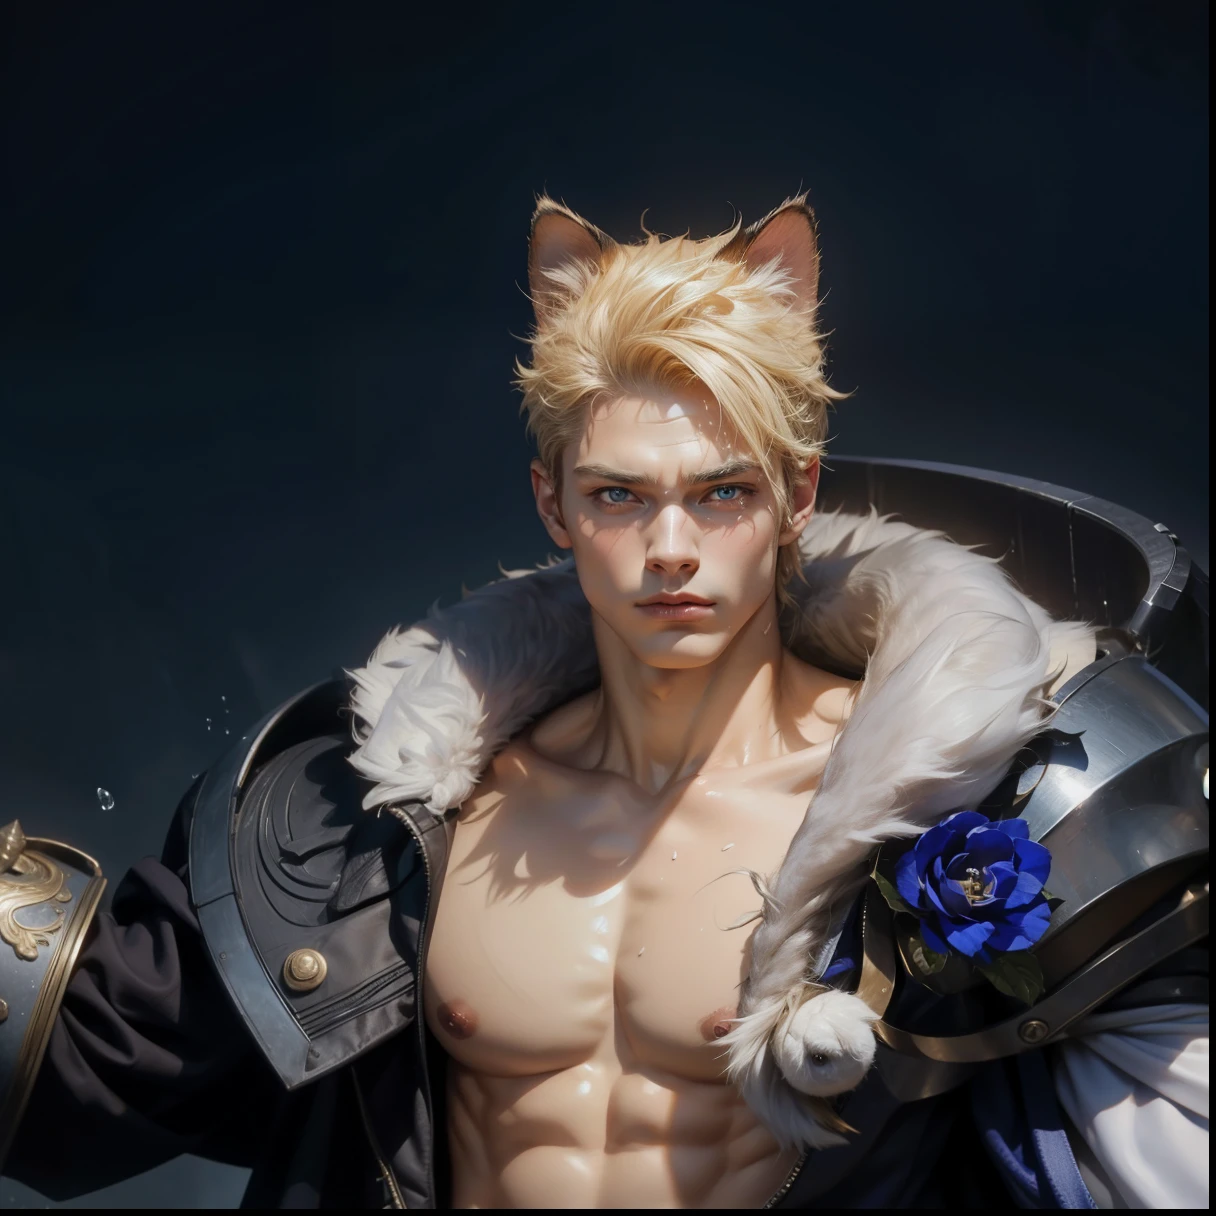 maximum resolution: 1.2), (Ultra HDTV: 1.2), 8K resolution, Eye and skin details, face details, , (Sharp focus: 1, 2), (Precise focuacial expressions: 1,2), 1 Yes guy, Blonde hair, Cat ears, Sword in hand, (Naked), Natural skin, No hair, Perfect muscles, 6 pack, Sweat on his belly and chest, transparent white briefs